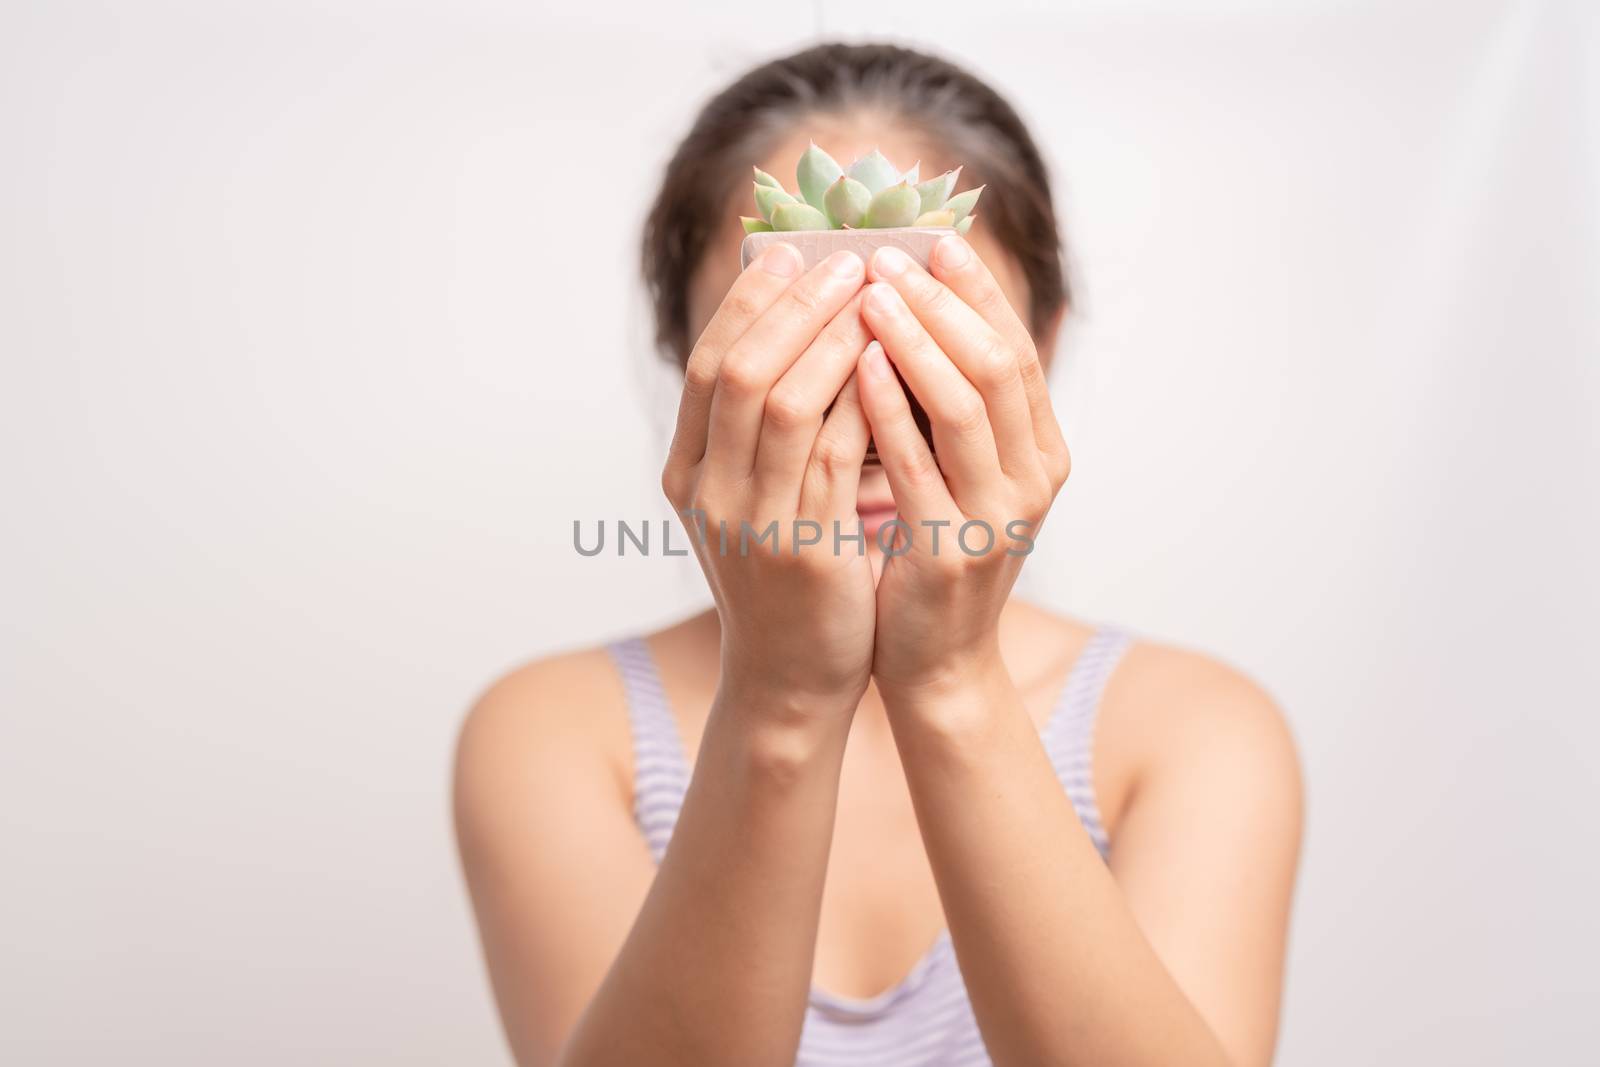 Women holding a green cactus tree on white background